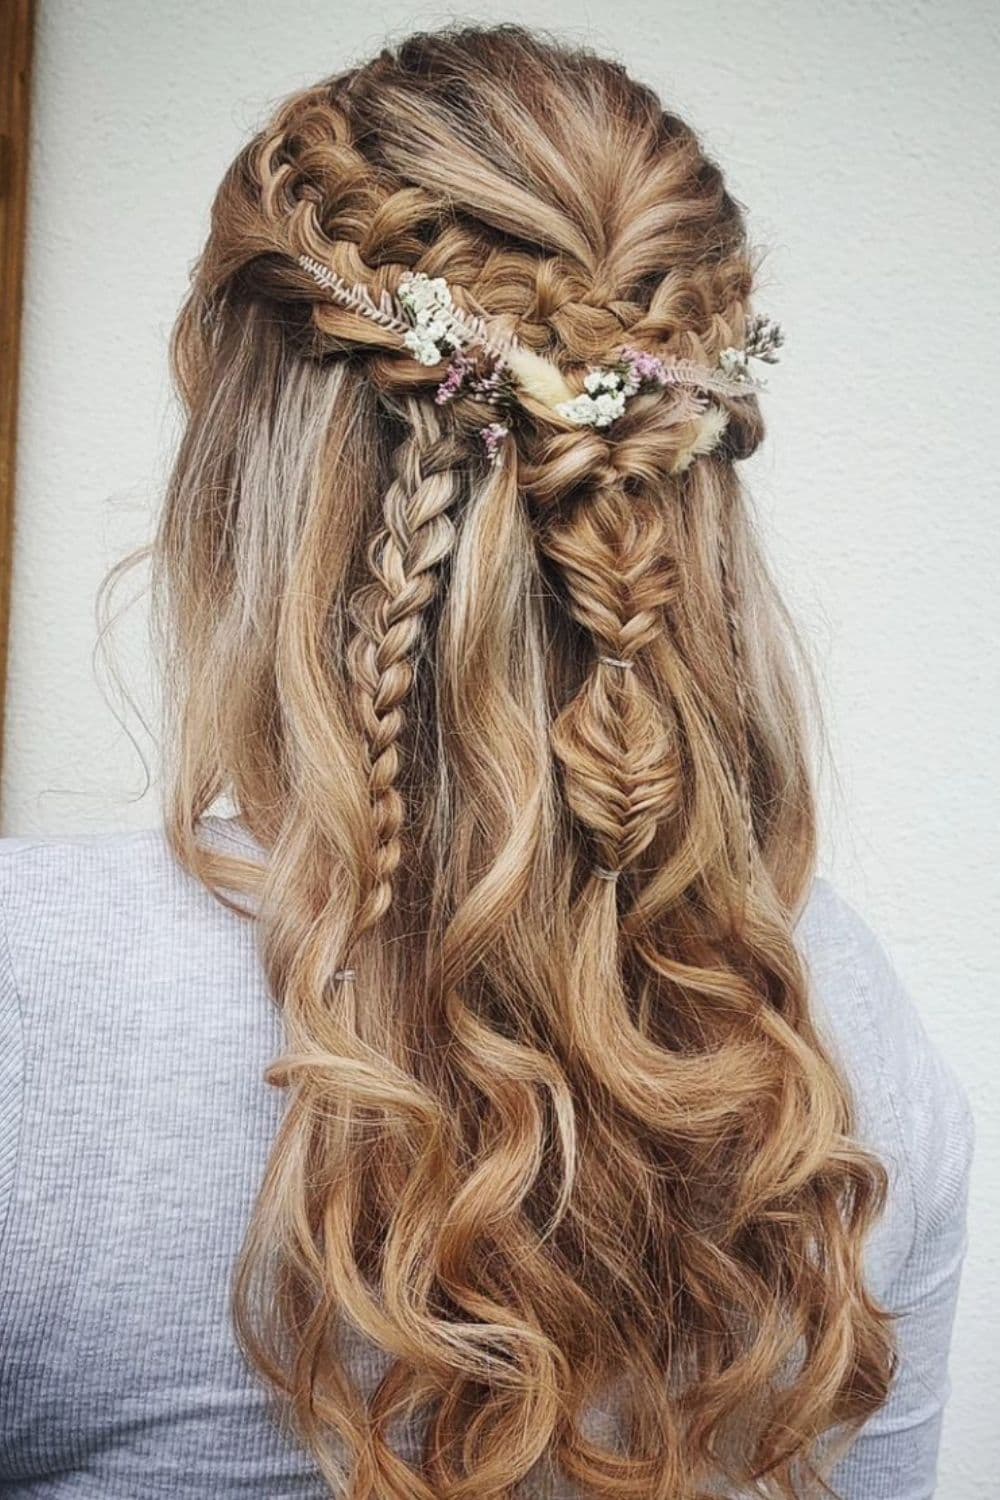 A woman with blonde half up hairstyle with fishtail braids elements and flower hair accessories.